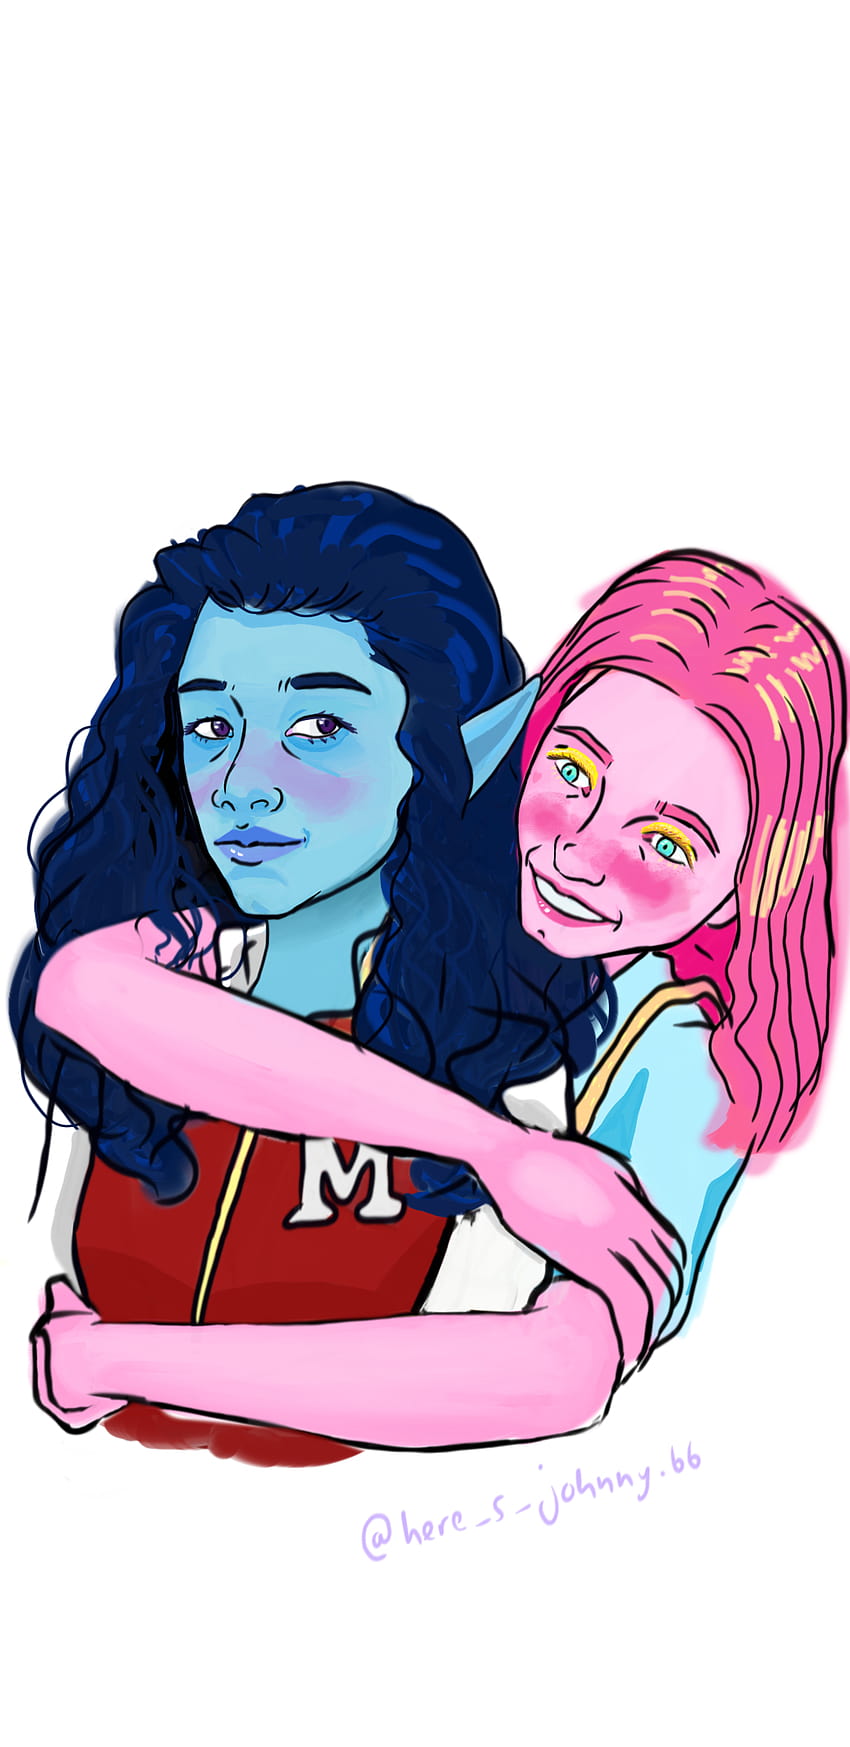 I did a of Rue and Jules dressed up as Marceline and Princess Bubblegum. Hope you like it and remember to follow me on instagram!: euphoria HD phone wallpaper